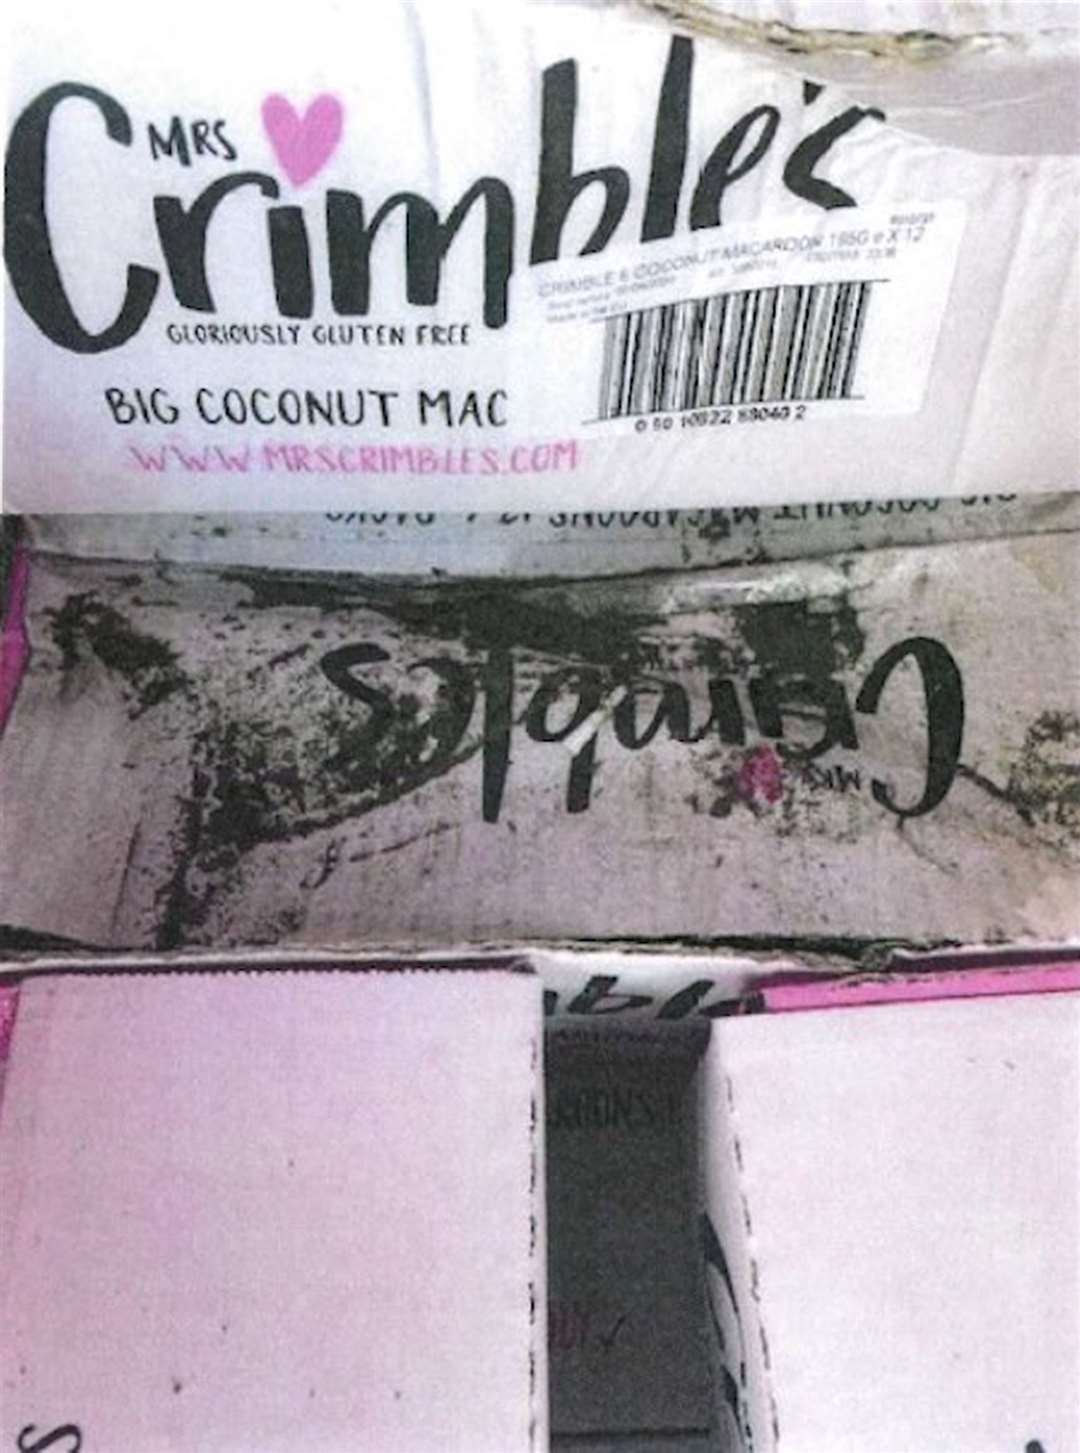 Damaged boxes of Mrs Crimble’s macaroons were rejected on October 18 2019 (Essex Police/PA)